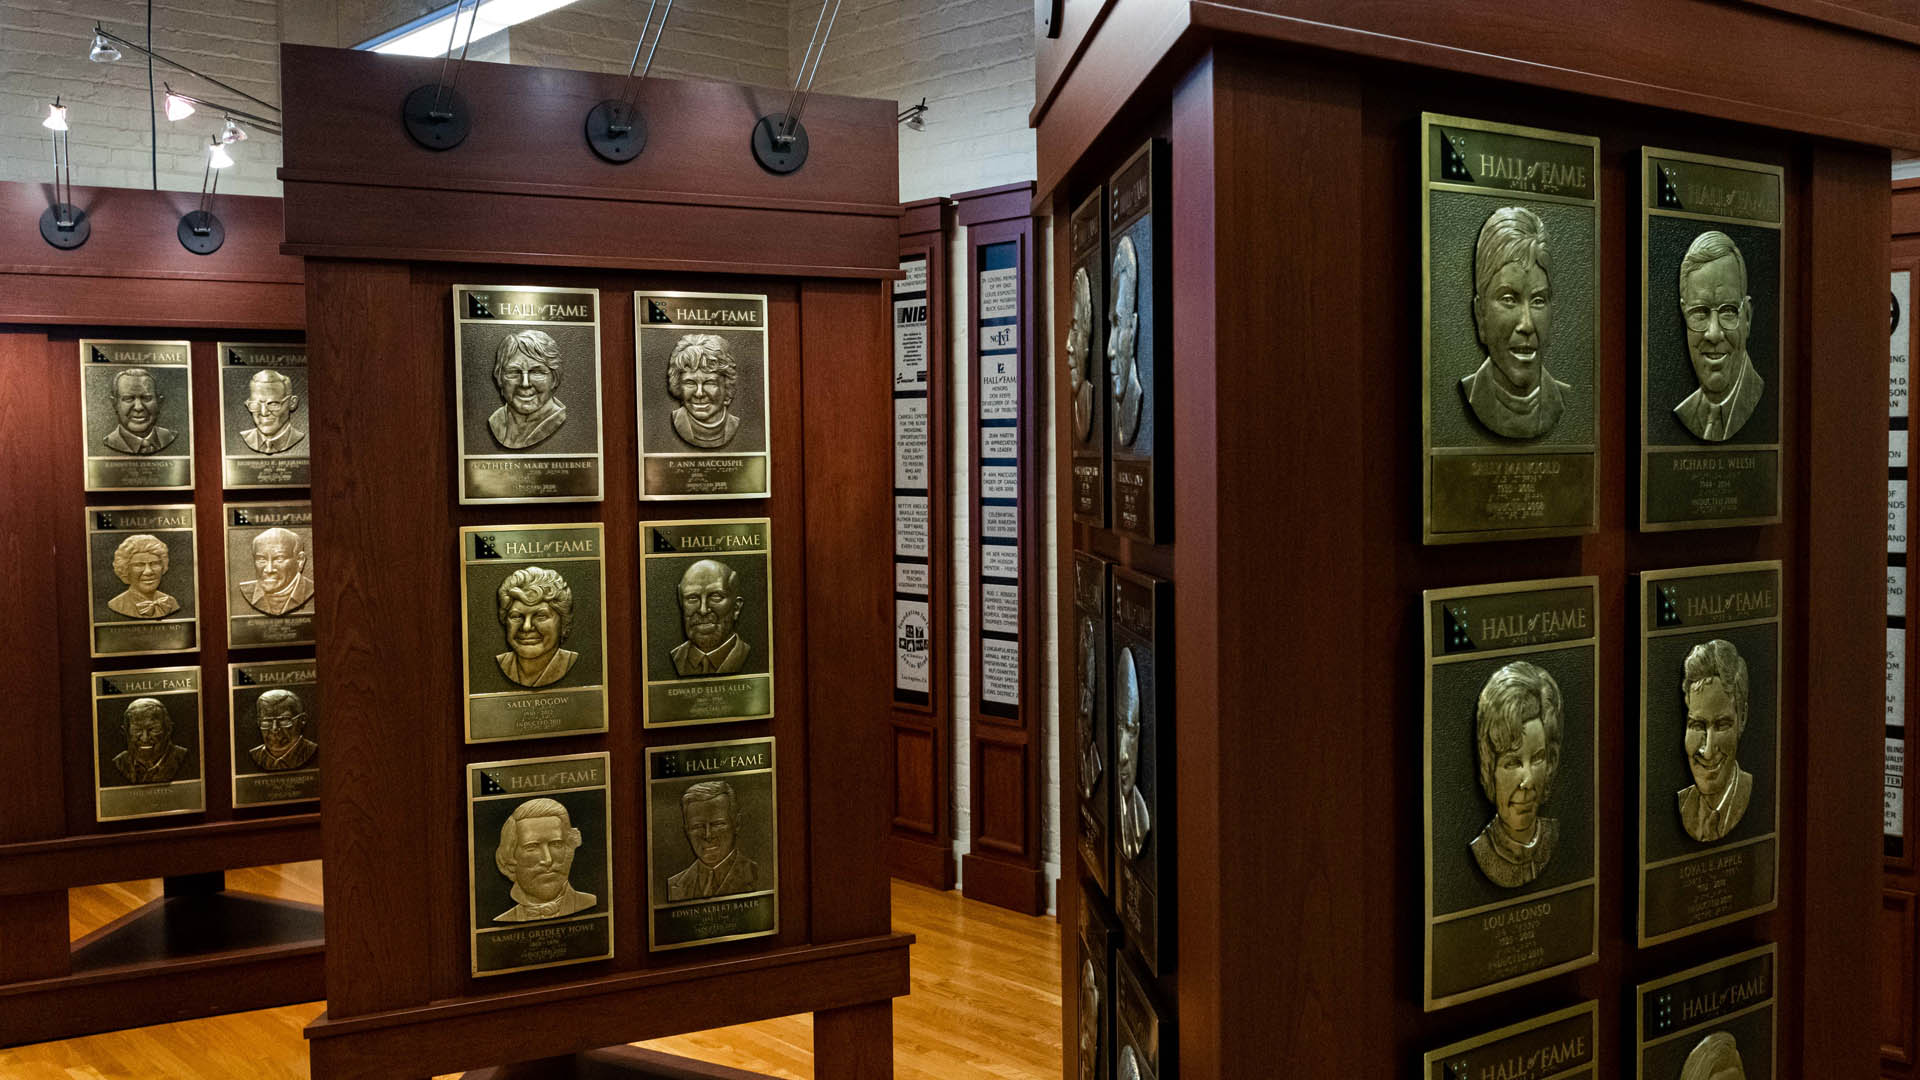 Triangular wooden stands in the Hall of Fame feature gold tone plaques with relief sculptures of people's faces